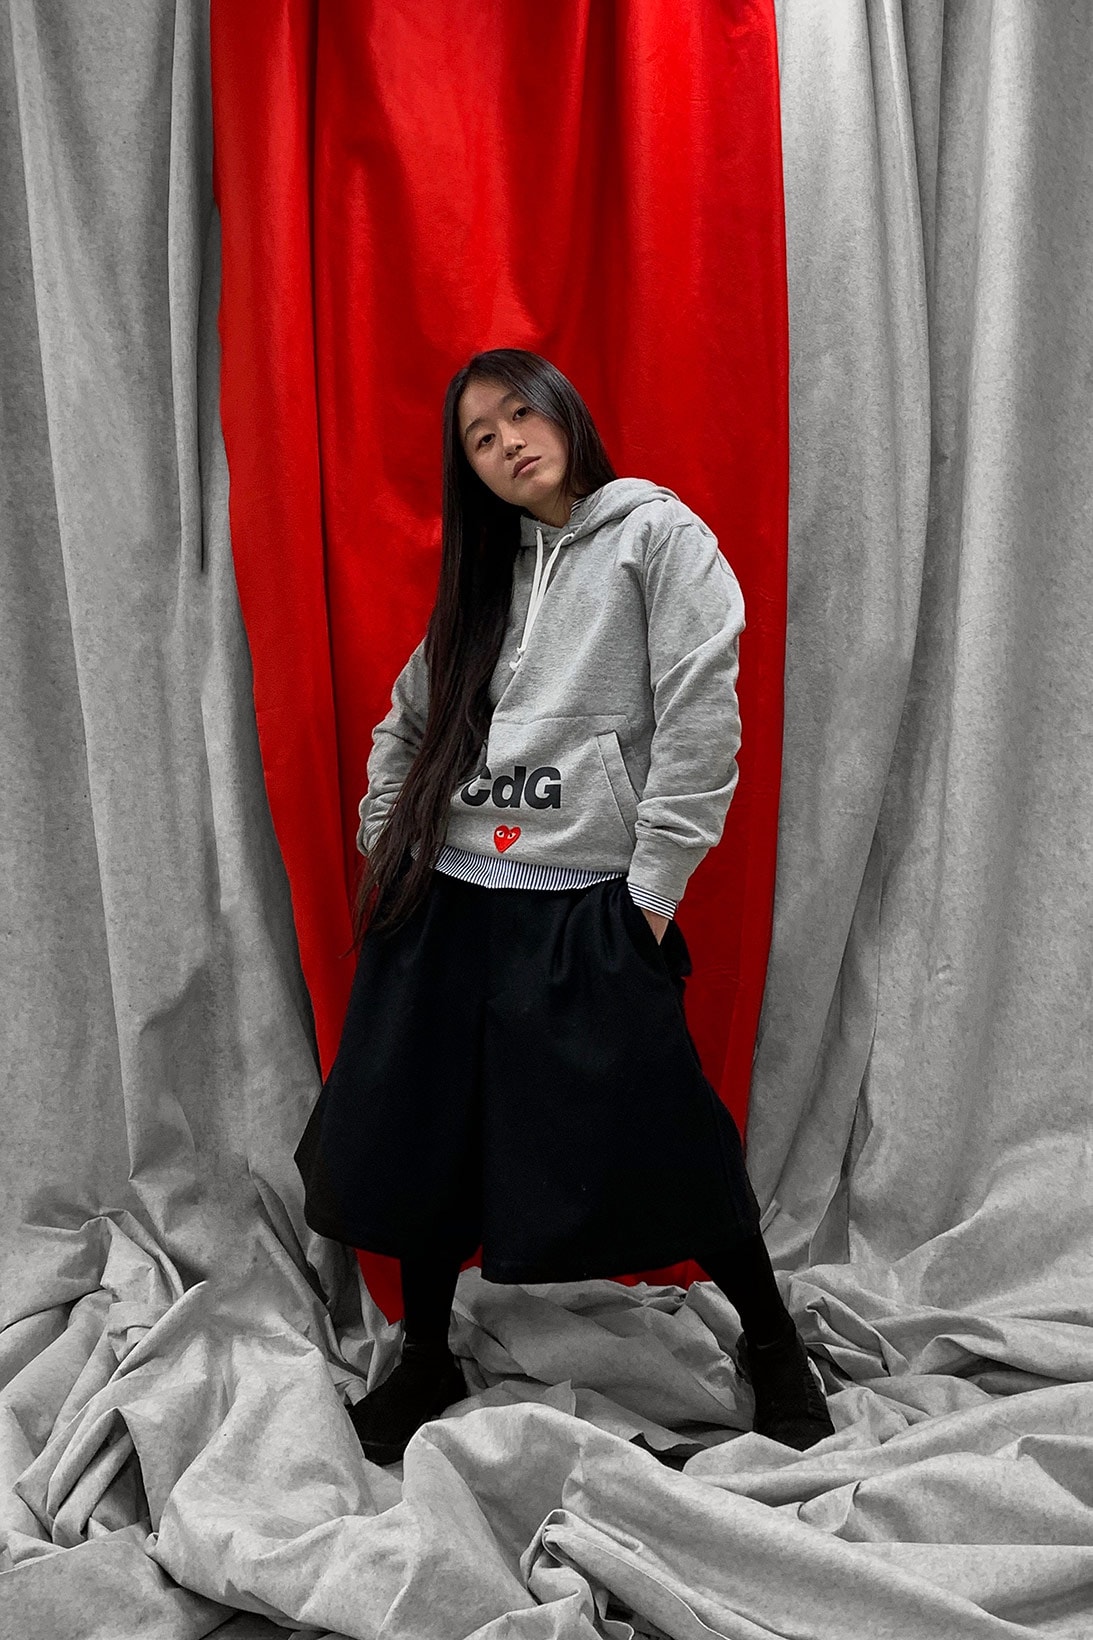 nike converse comme des garcons cdg play together collaboration campaign gray hoodies black skirt